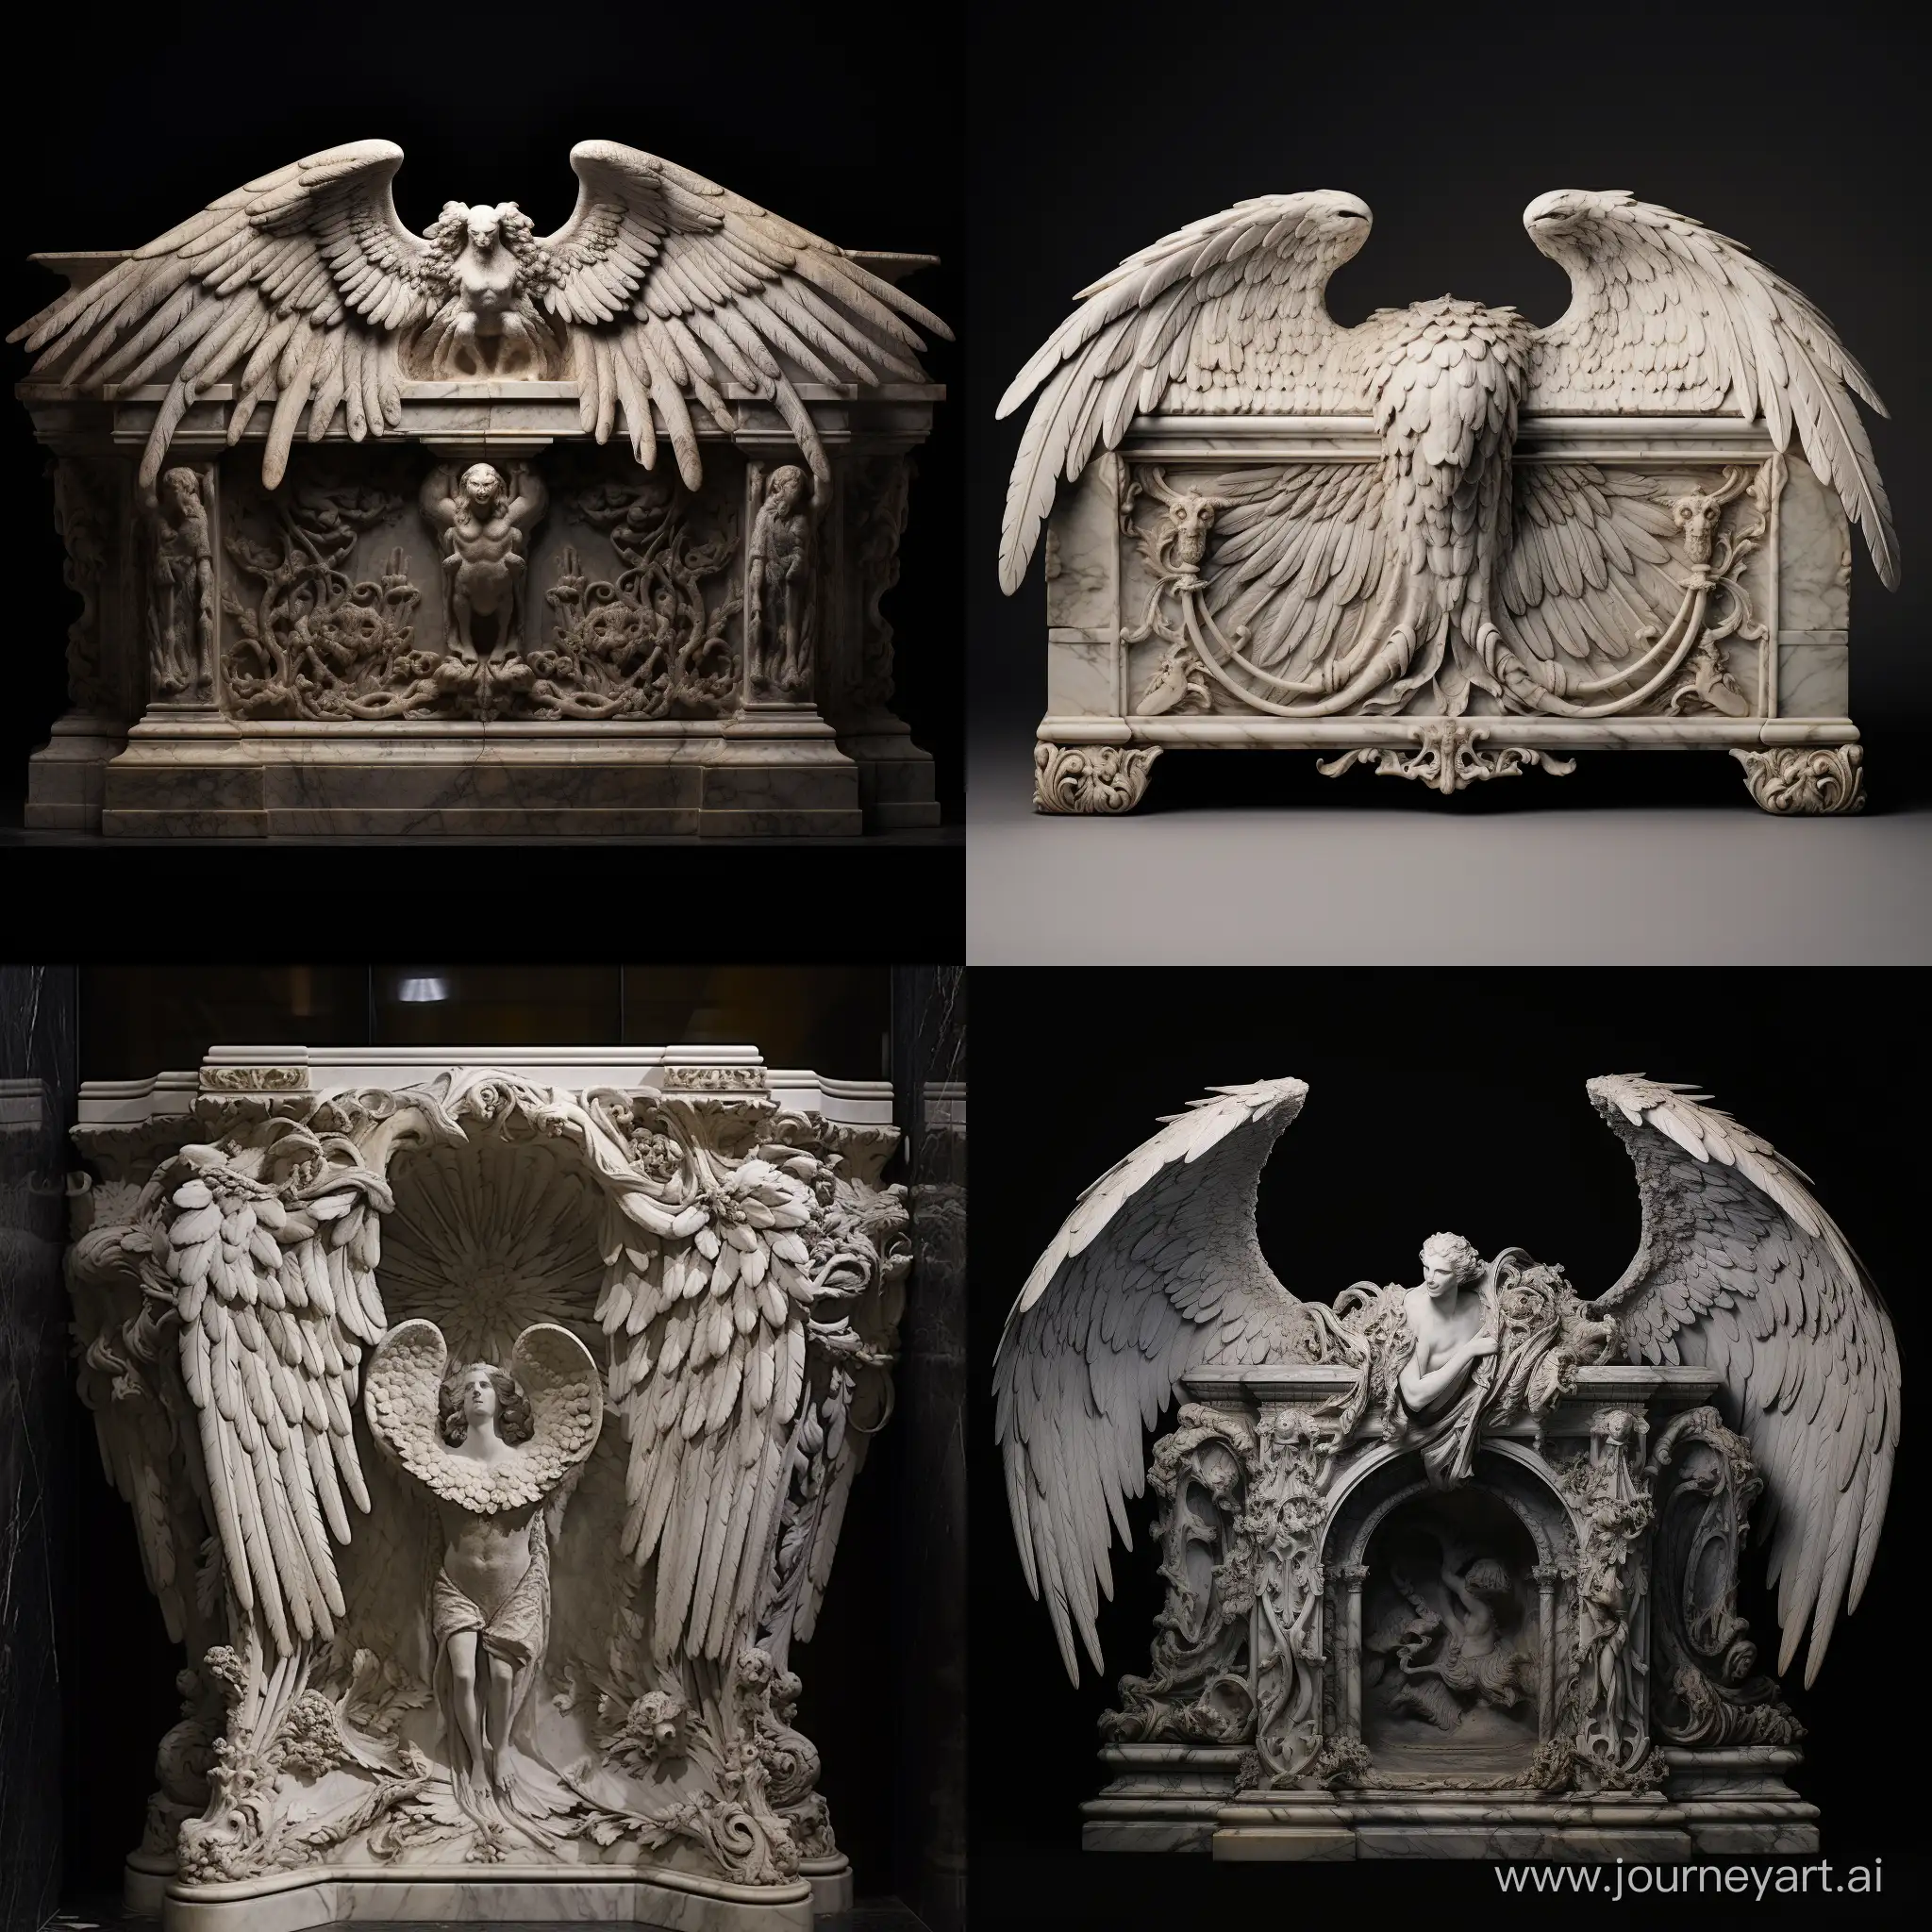 Heavenly-Serenity-AngelWinged-Ornamental-Engraved-Marble-Tomb